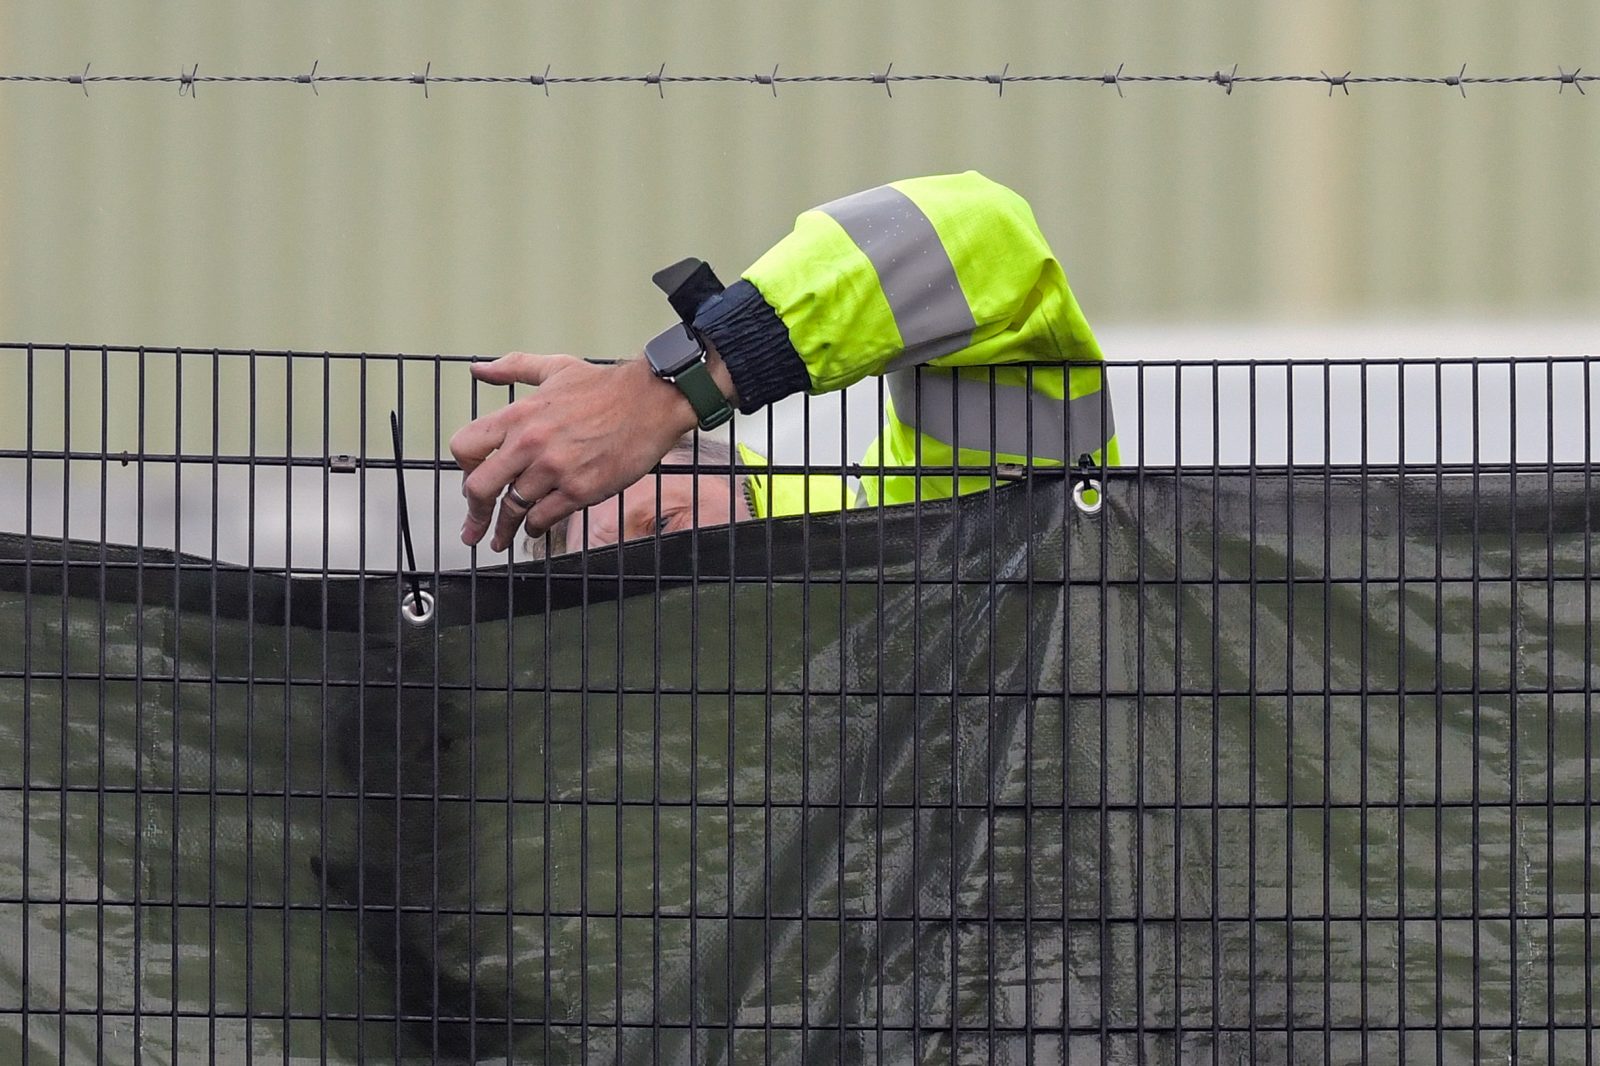 epa10279034 A security guard secures a screen at the outer perimeter at Manston immigration center, a short-term holding facility in Manston, Kent, Britain, 01 November 2022. British Home Secretary Suella Braverman whilst speaking in the House of Commons on 31 October 2022 denied ignoring legal advice to procure more accommodation amid warnings that Manston is dangerously overcrowded. The Chief Inspector of Prisons Charlie Taylor who has recently inspected the center stated that the Home Office needs to 'get a grip' of the situation.  EPA/STUART BROCK